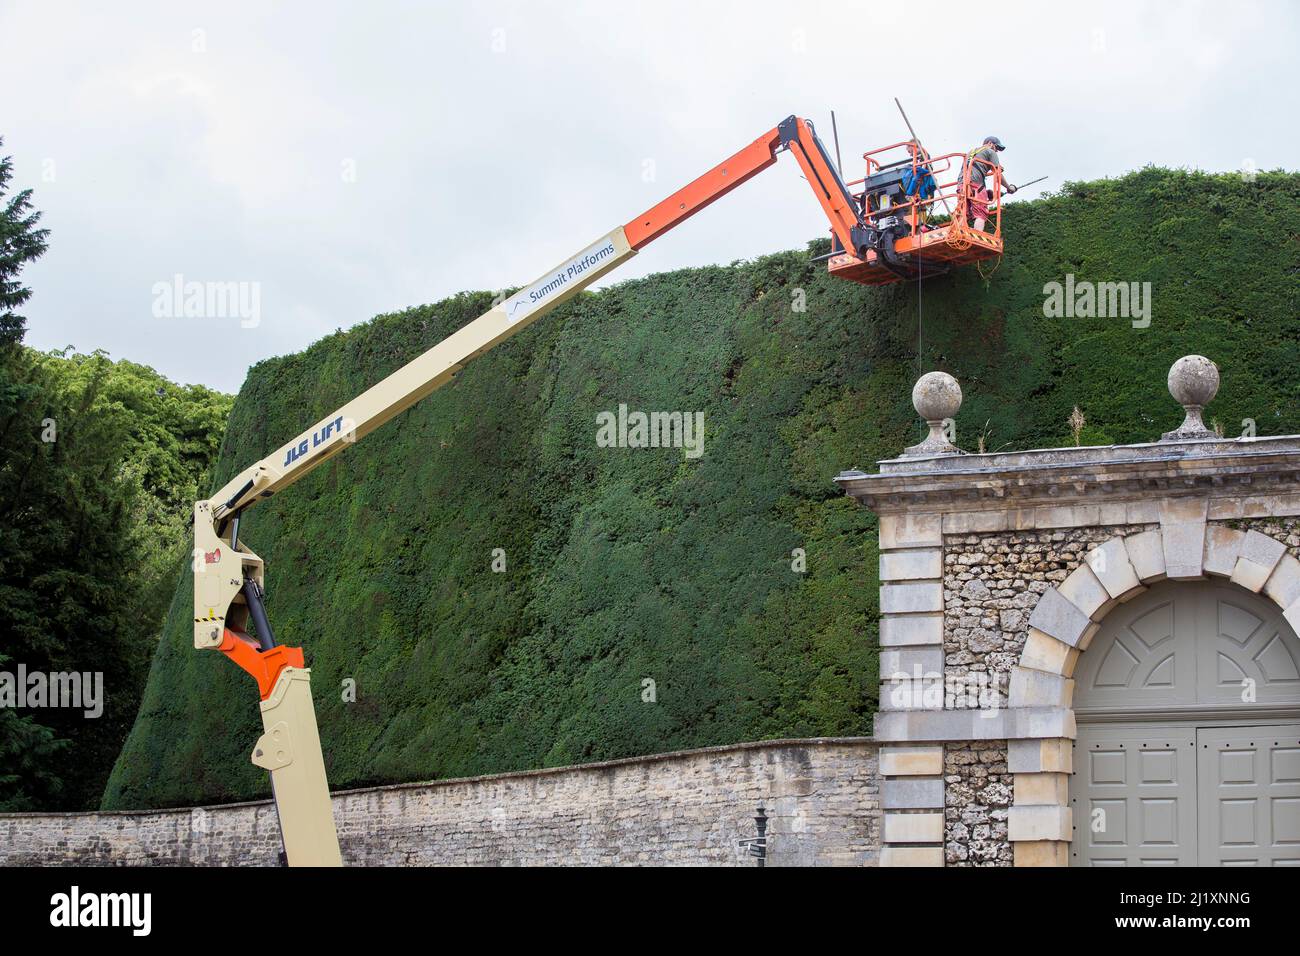 Workers from the Bathurst Estate, Cirencester use a cherry picker to give the estates 40ft high, 300 year old Yew hedge it's annual trim. The hedge is said to be the largest of it’s kind in the world and it can take up to 2 weeks to complete the job. Stock Photo